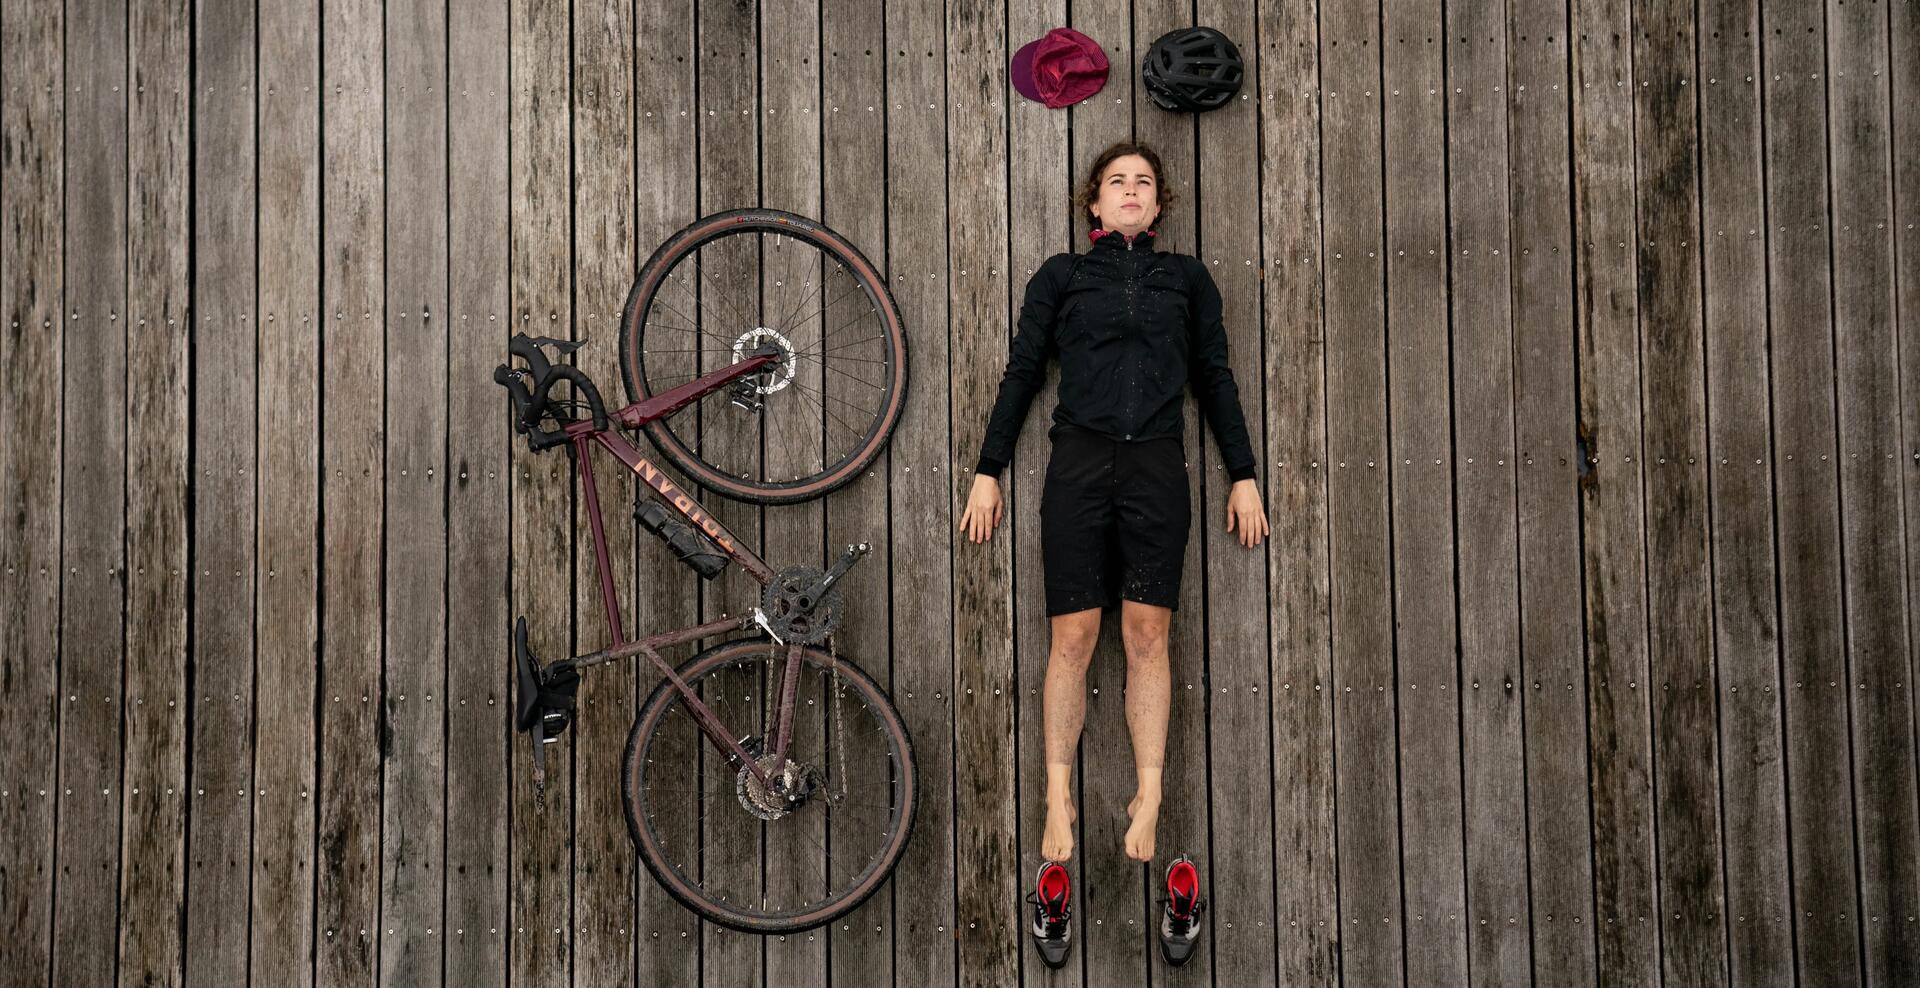 Bike touring on your own as a woman